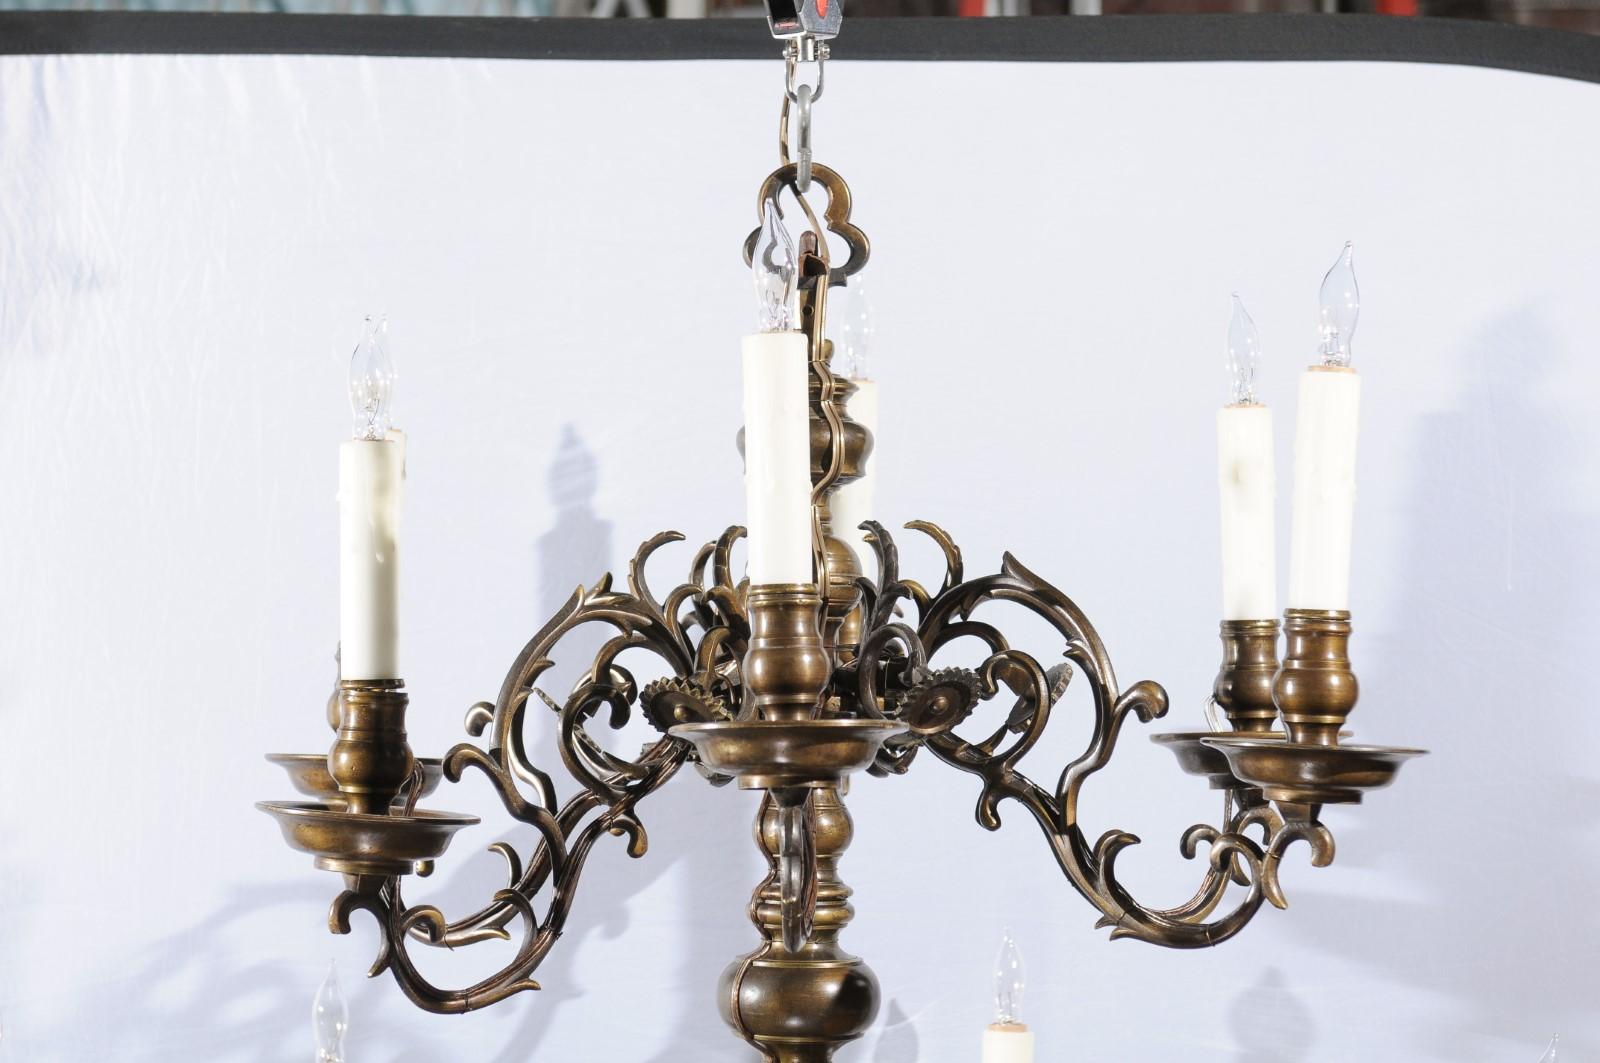 Large 2-Tier Dutch Brass Chandelier with 12 Lights, 18th Century For Sale 1